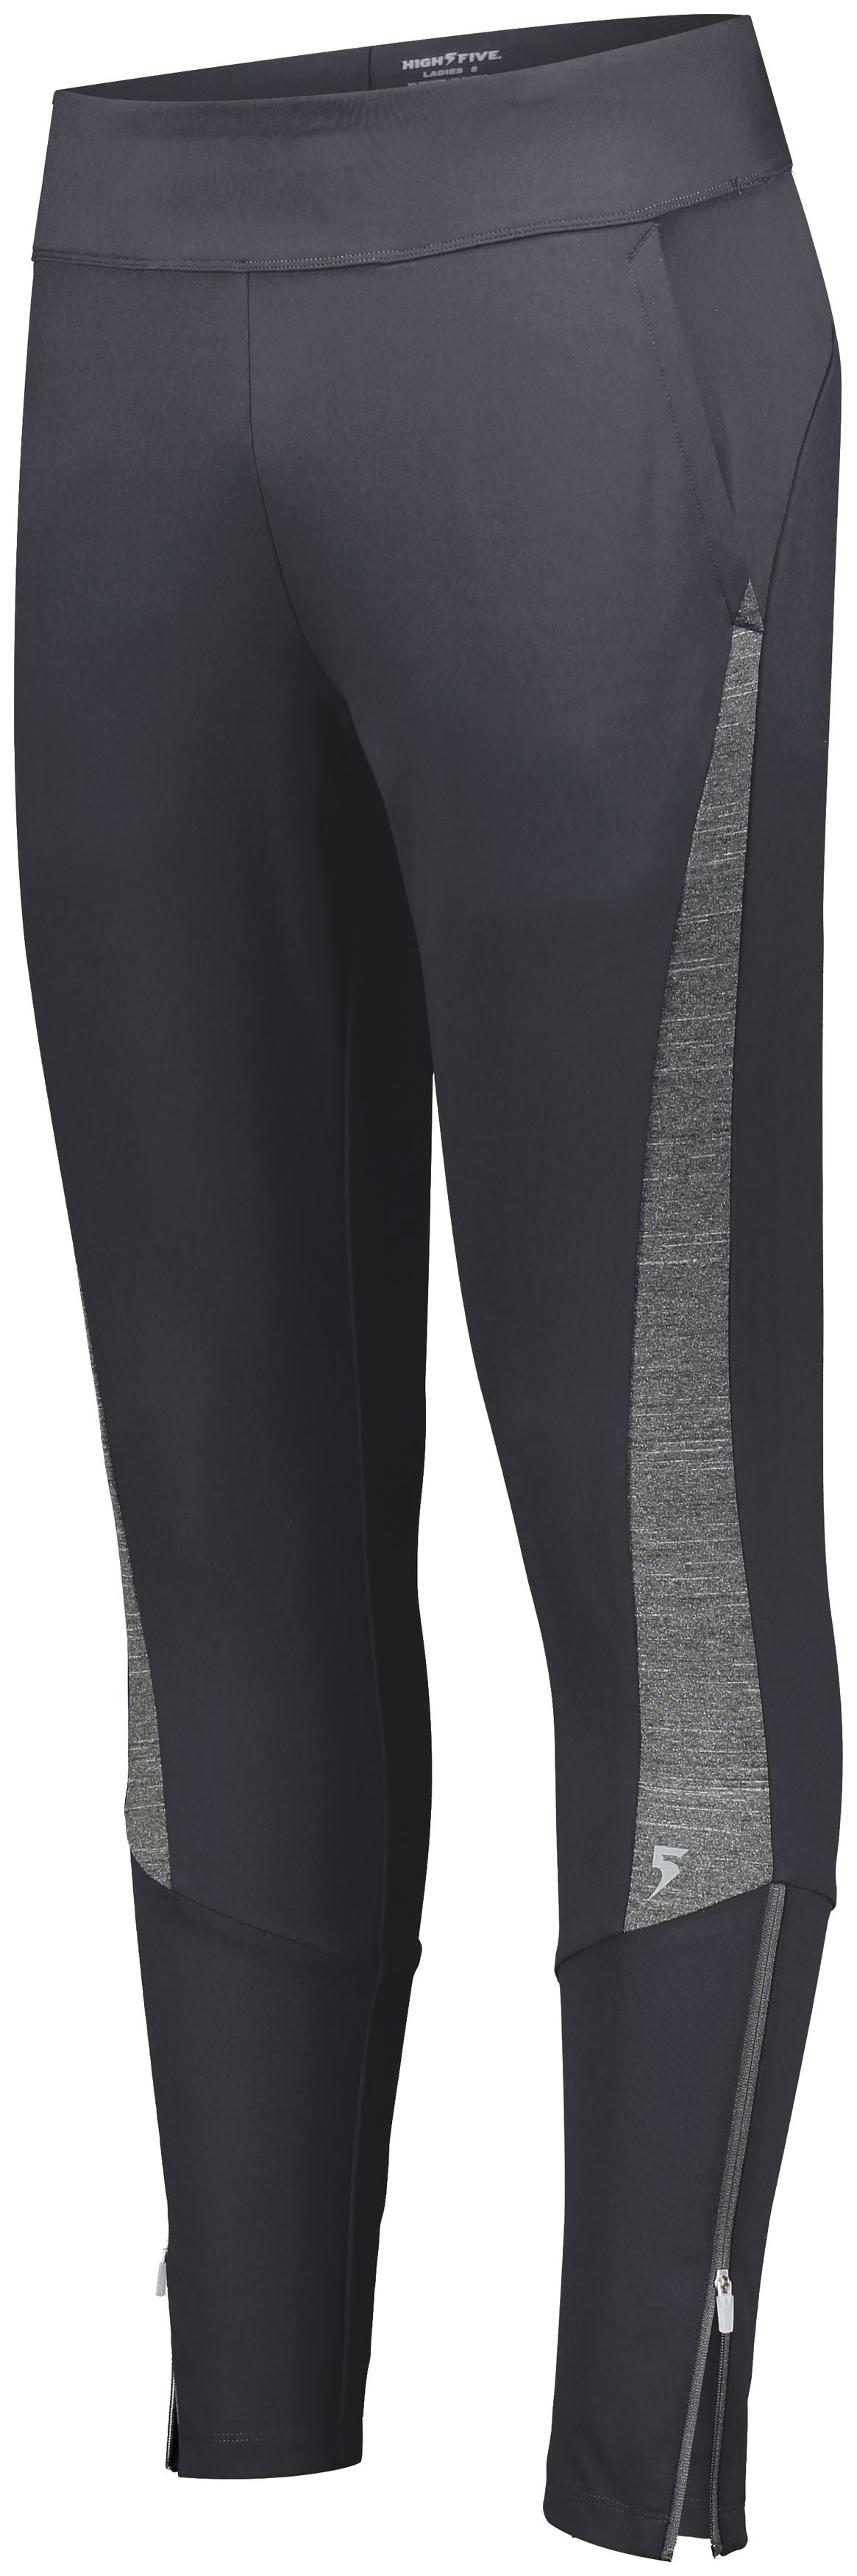 High 5 Ladies Free Form Pant in Carbon/Carbon Heather  -Part of the Ladies, Ladies-Pants, Pants, High5-Products product lines at KanaleyCreations.com